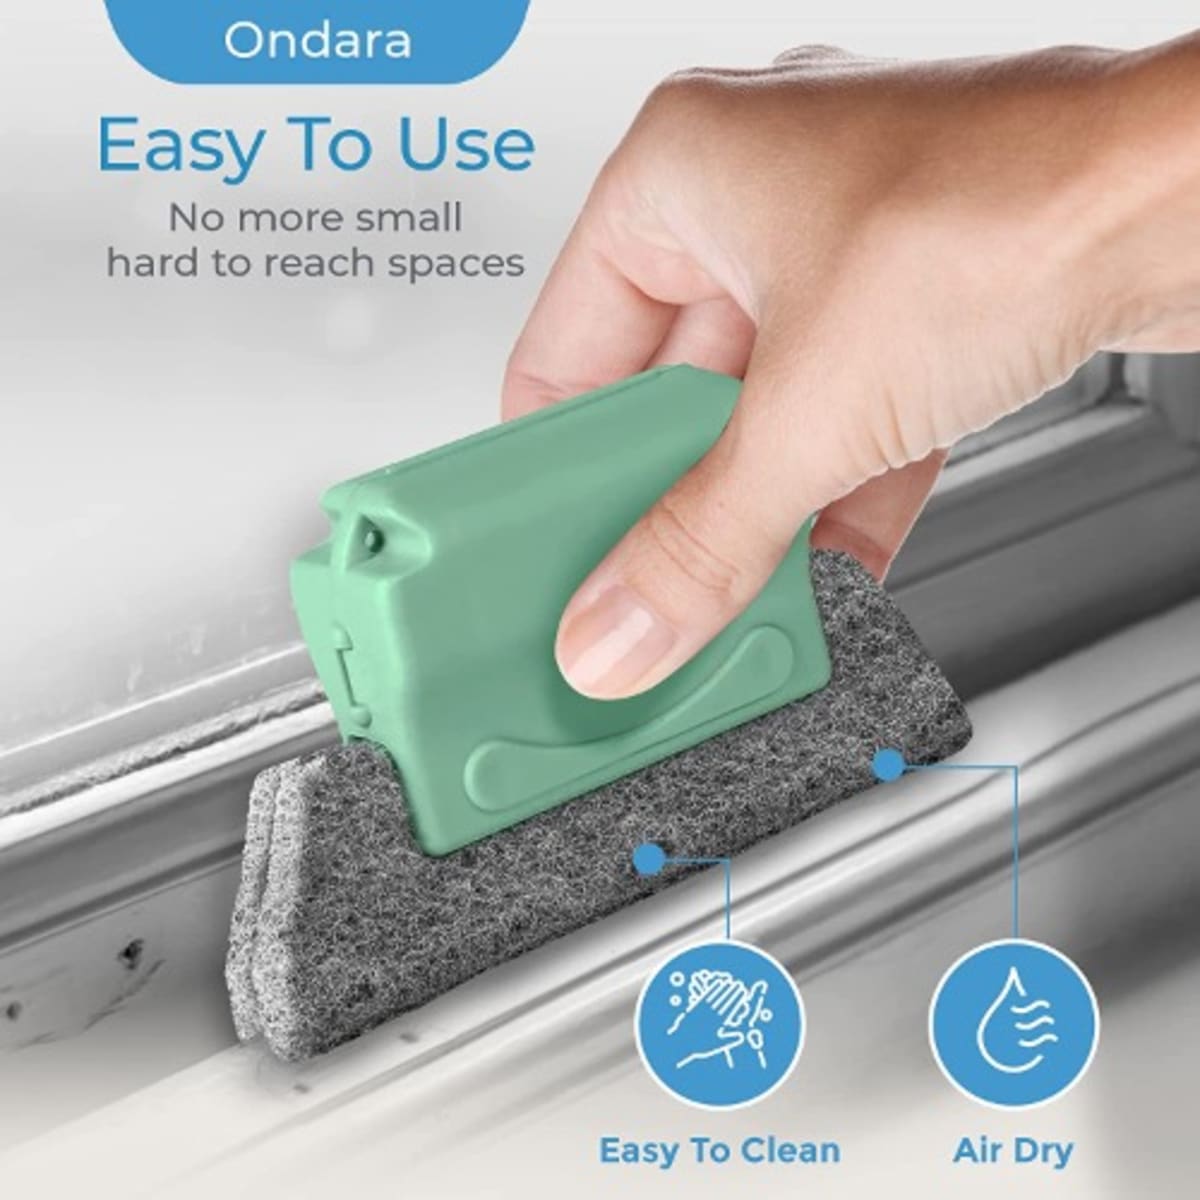 Window Groove Cleaning Brush - Green